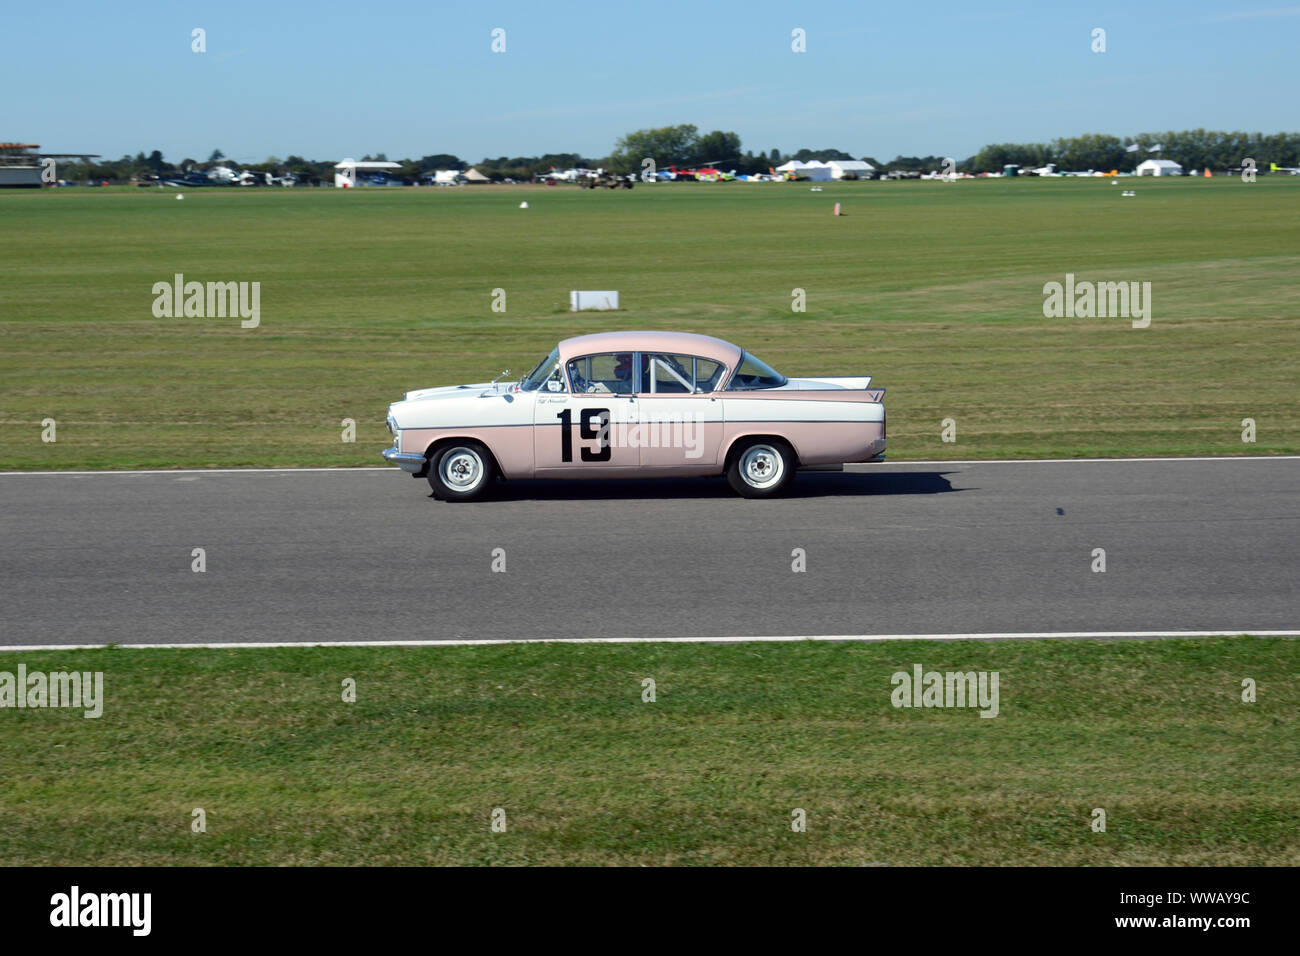 Goodwood Revival 13th September 2019 - St Mary's Trophy - 1958 Vauxhall PA Cresta driven by Tiff Needell Stock Photo